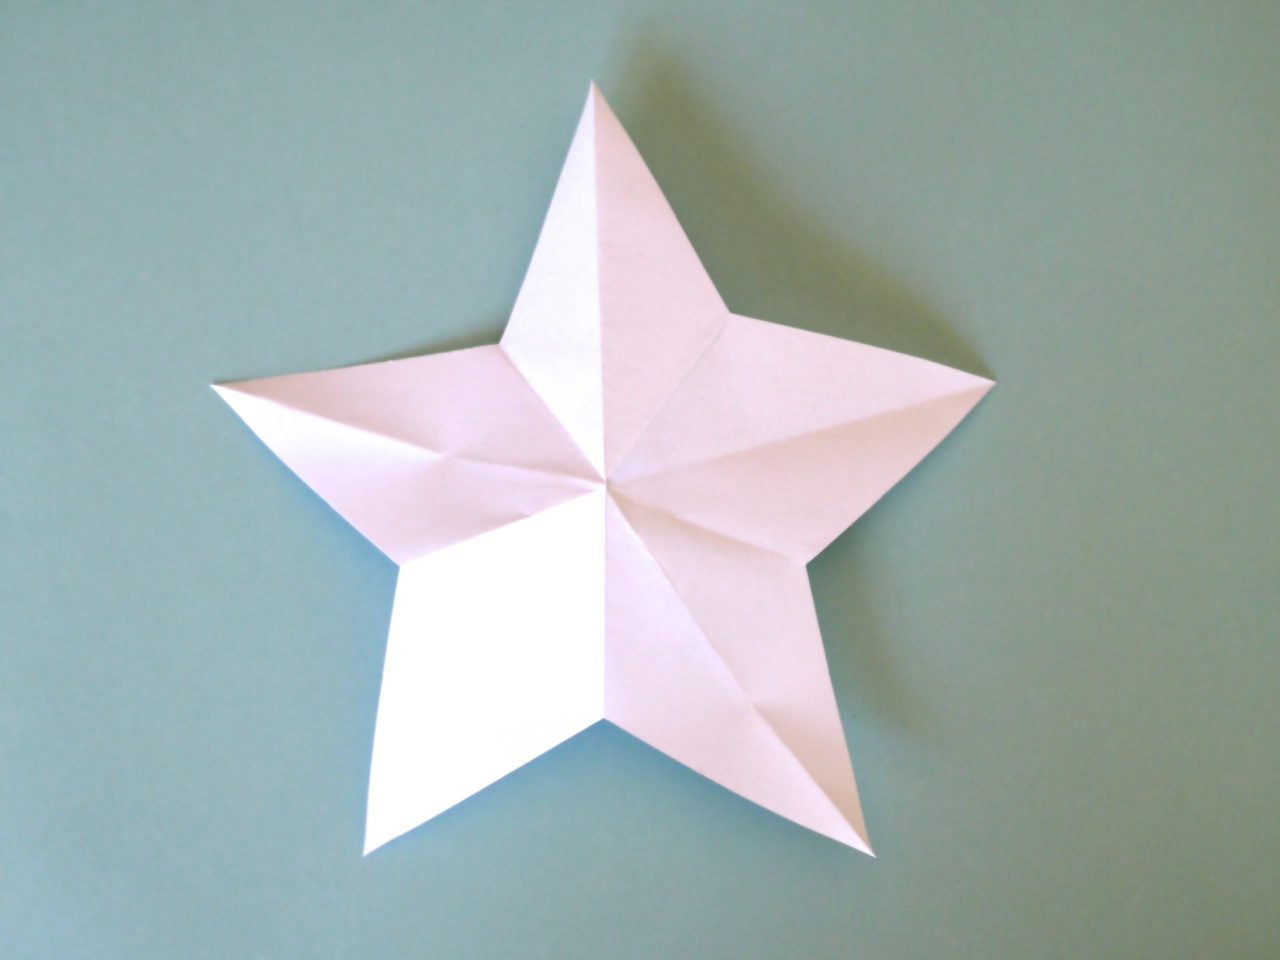 How to Cut Out a Paper Star